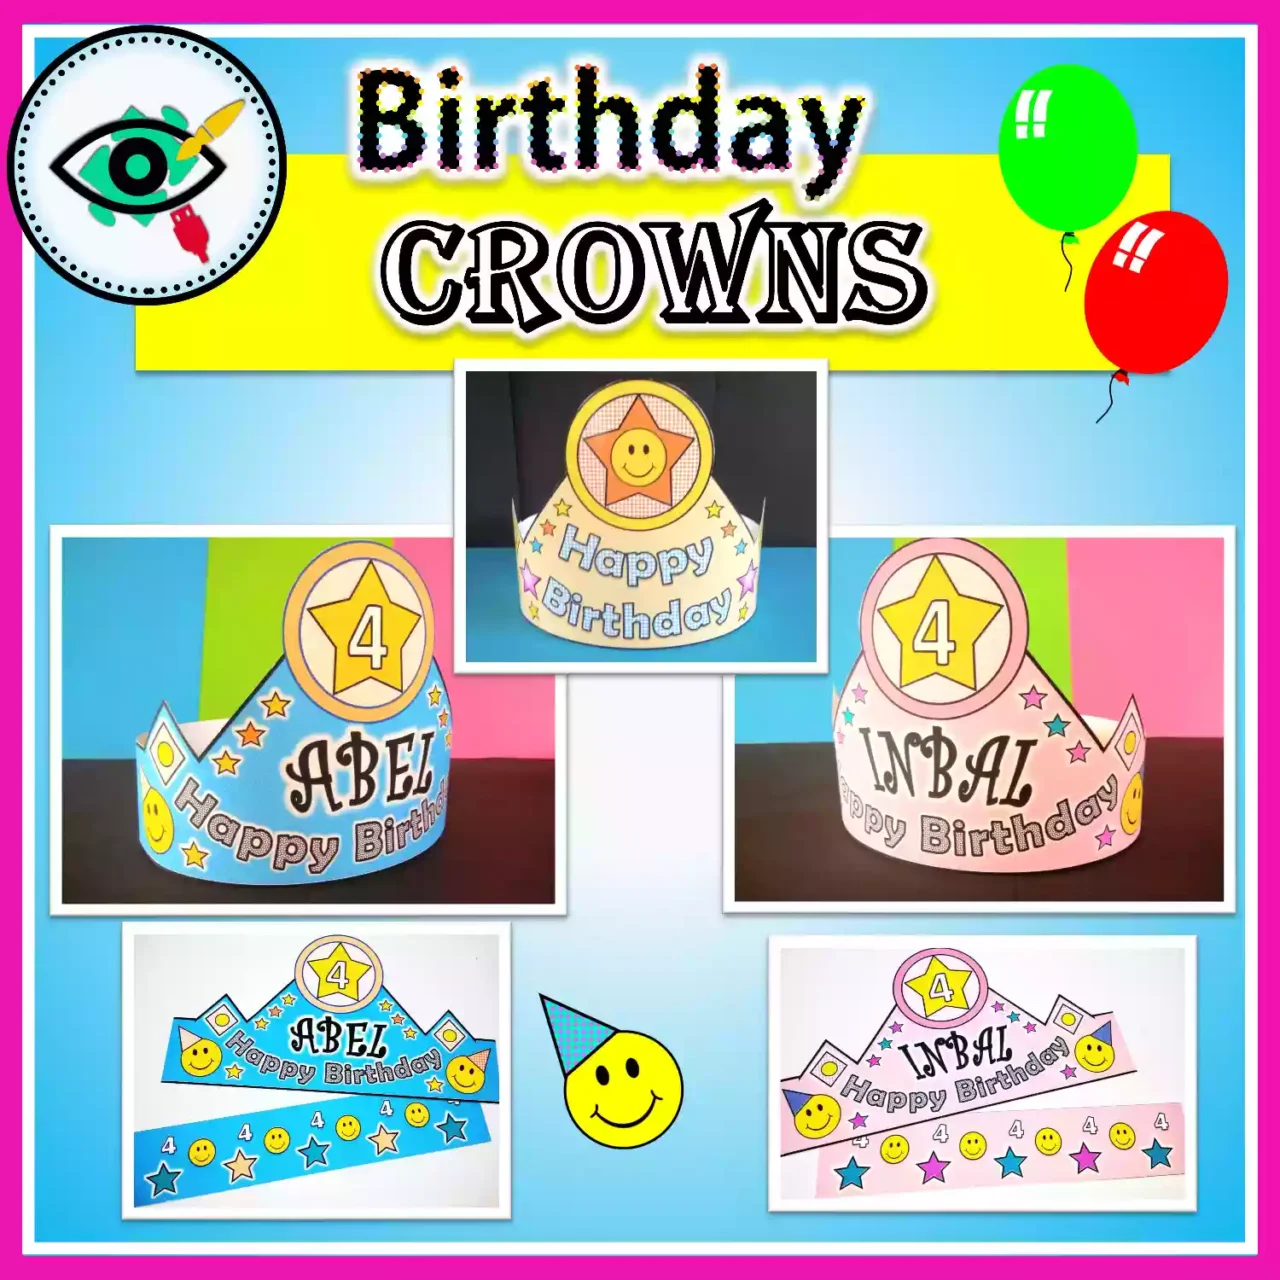 Crafts for Kids - Birthday Crowns - Featured 1